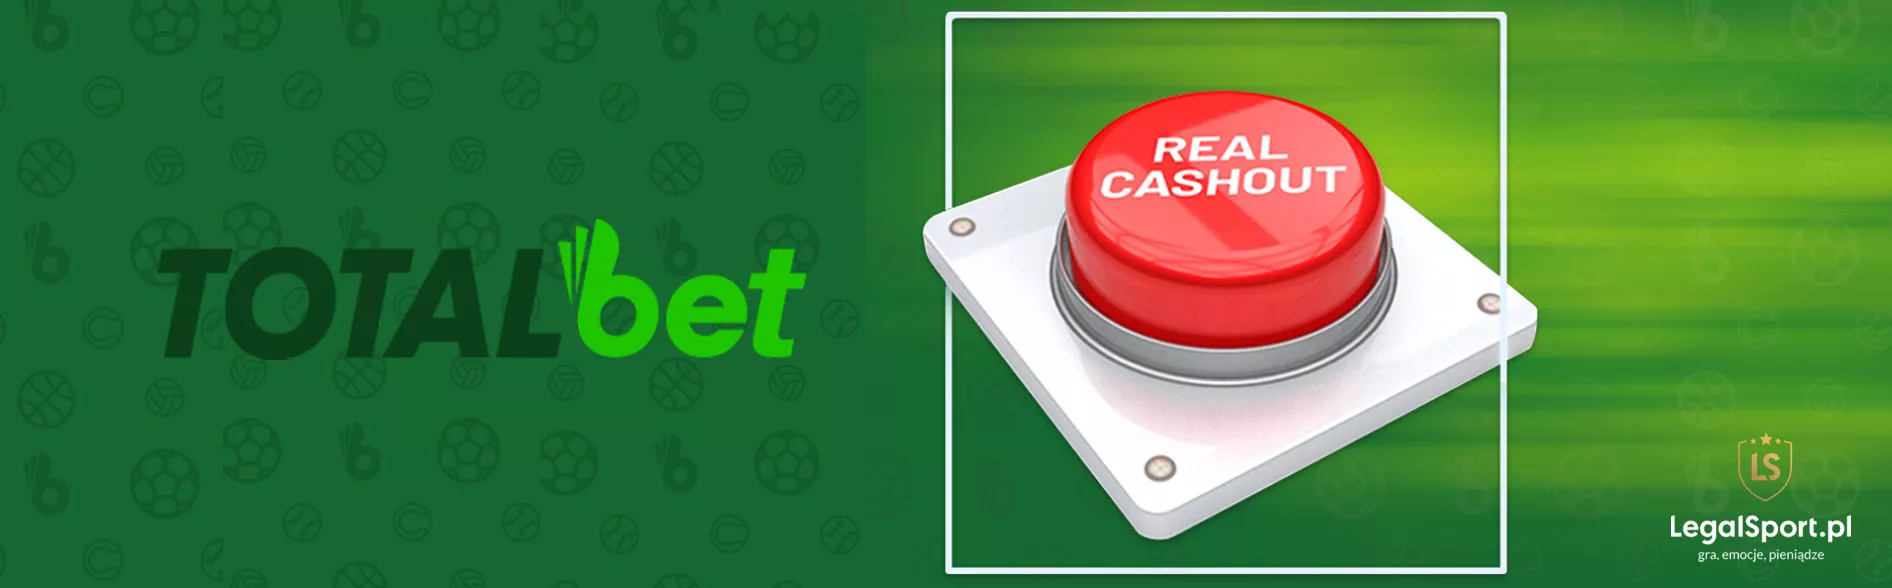 Real Cashout w TOTALbet online